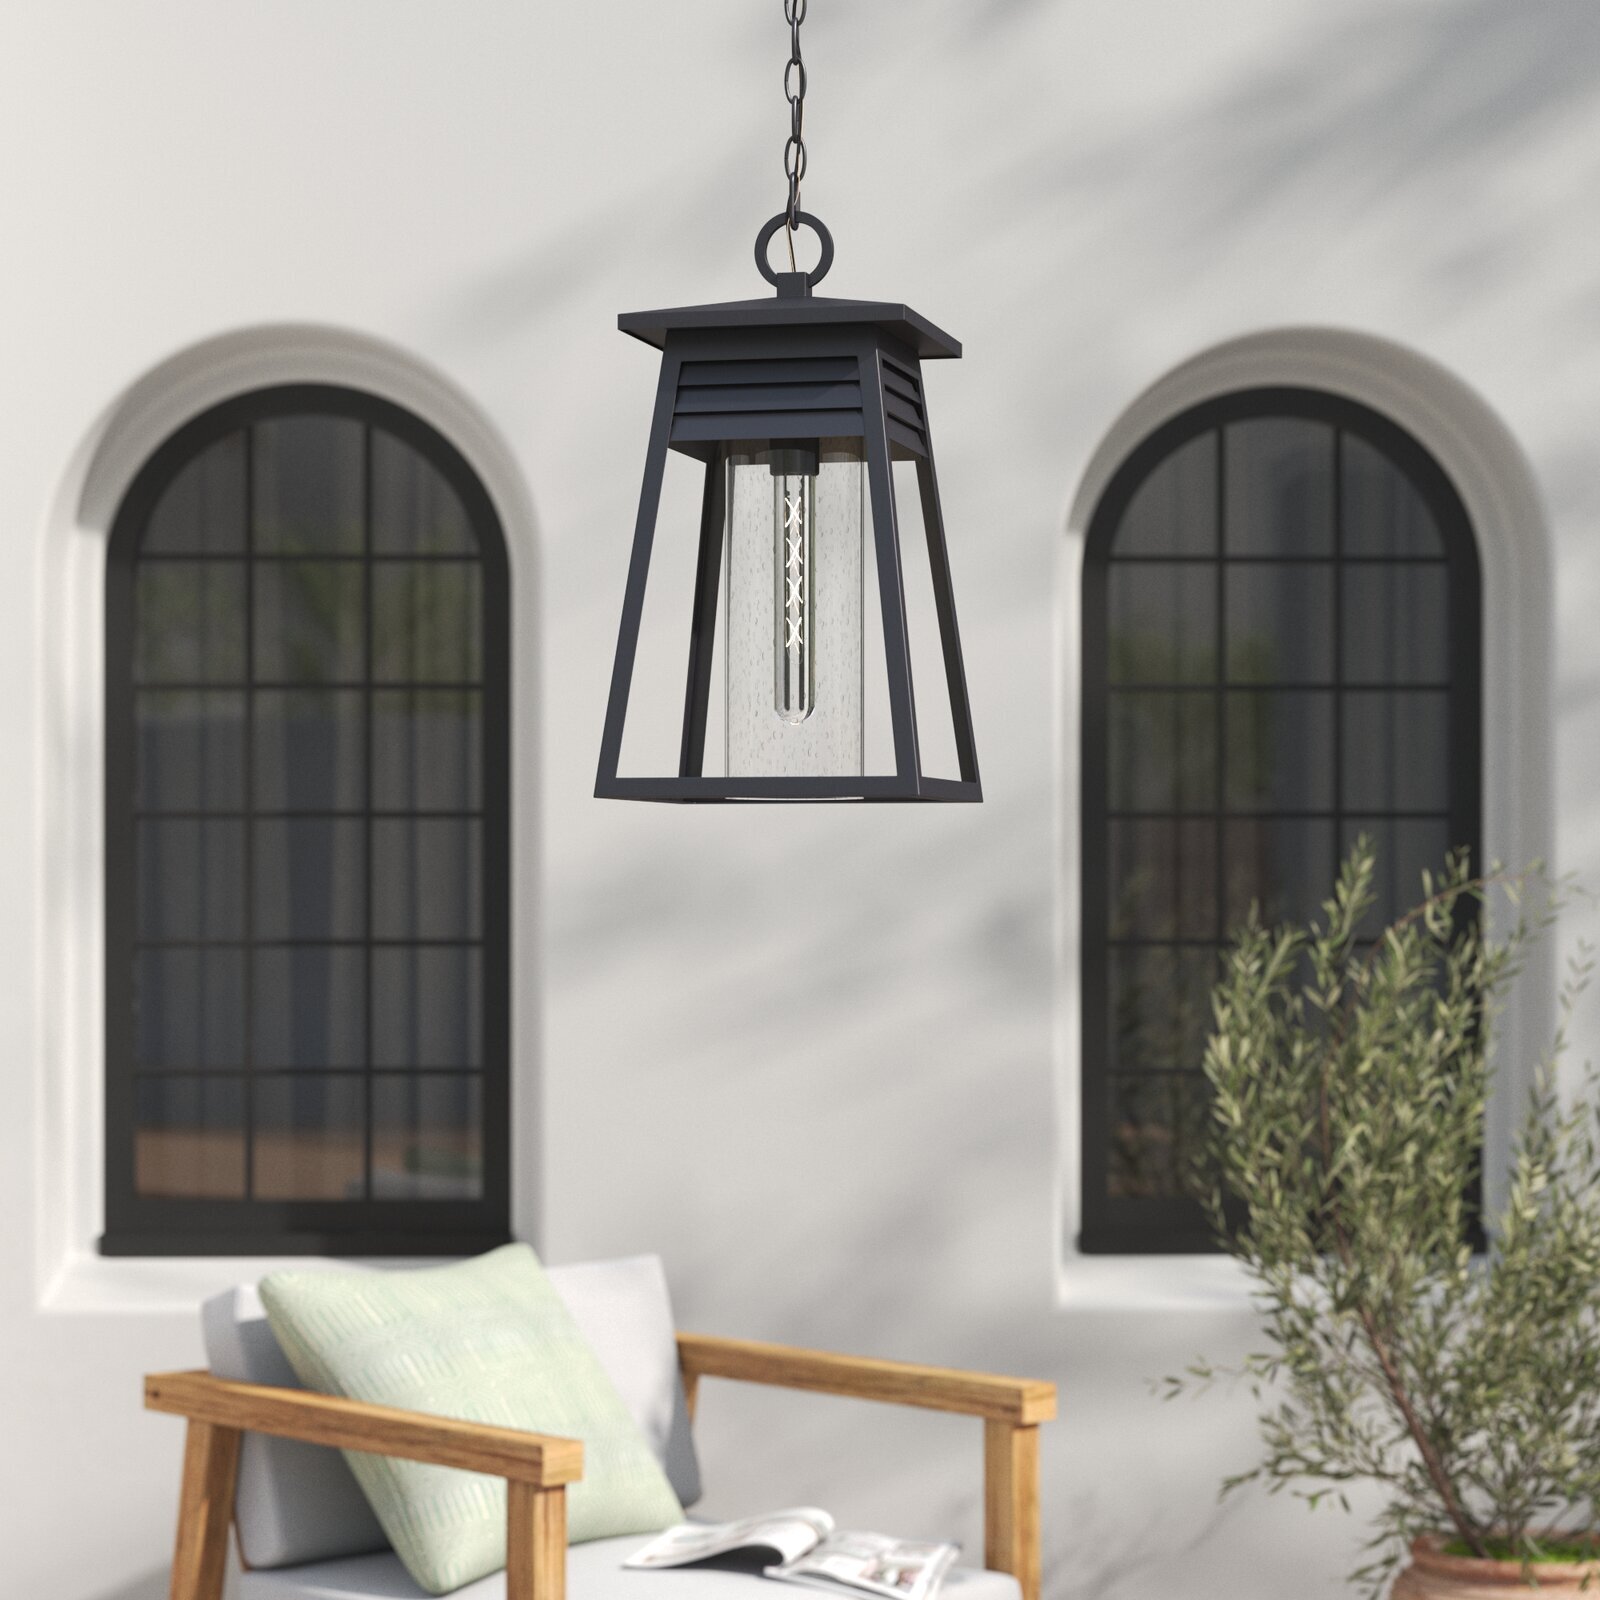 Transitional large outdoor pendant